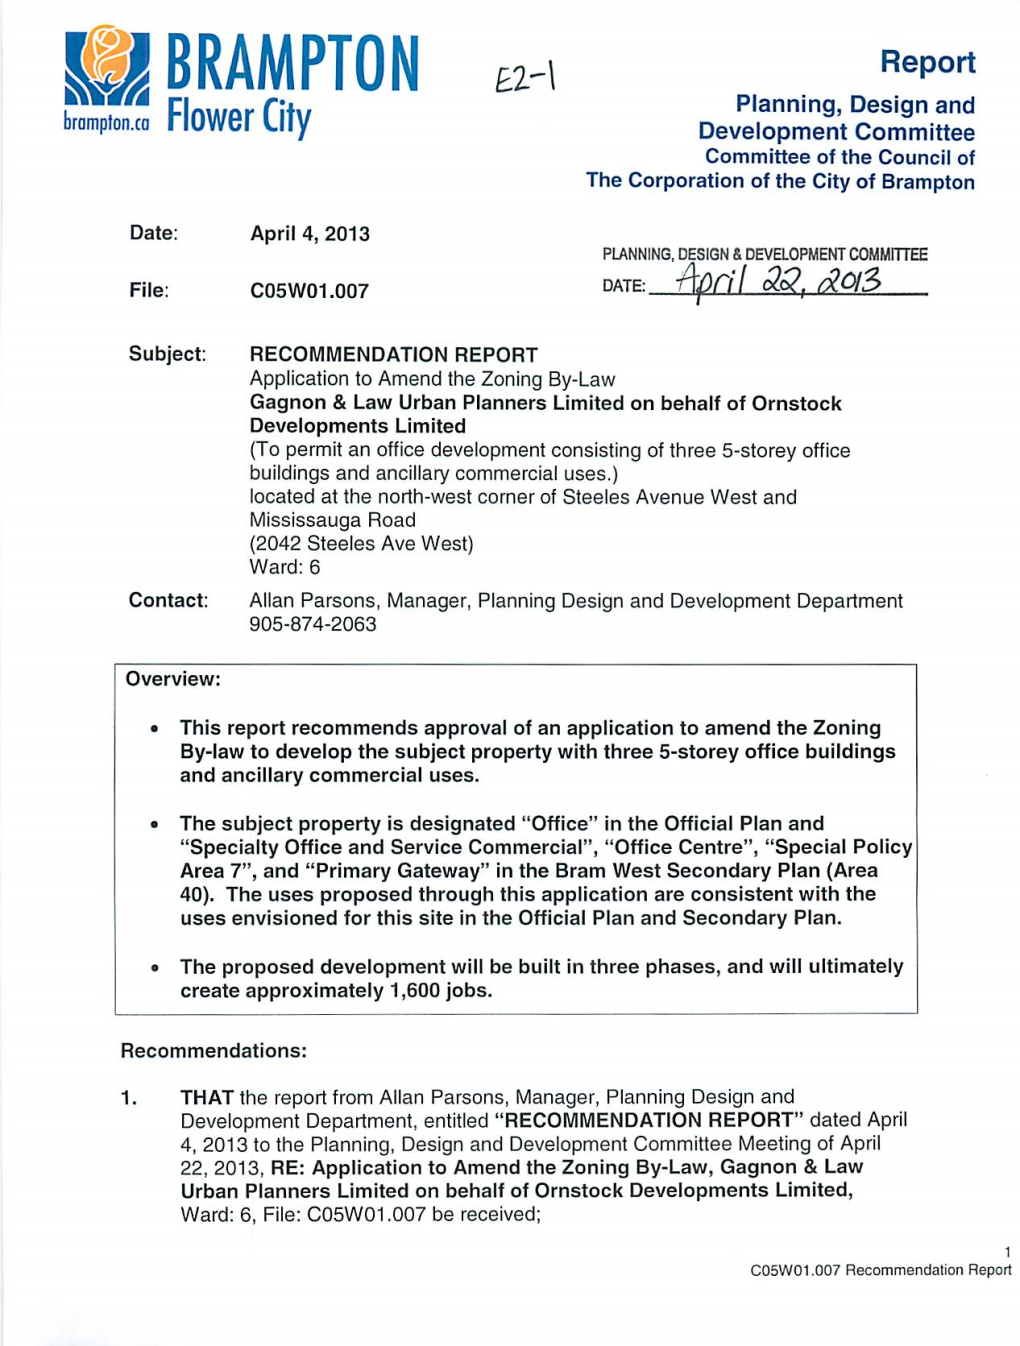 Planning Design and Development Committee Item E2 for April 22, 2013